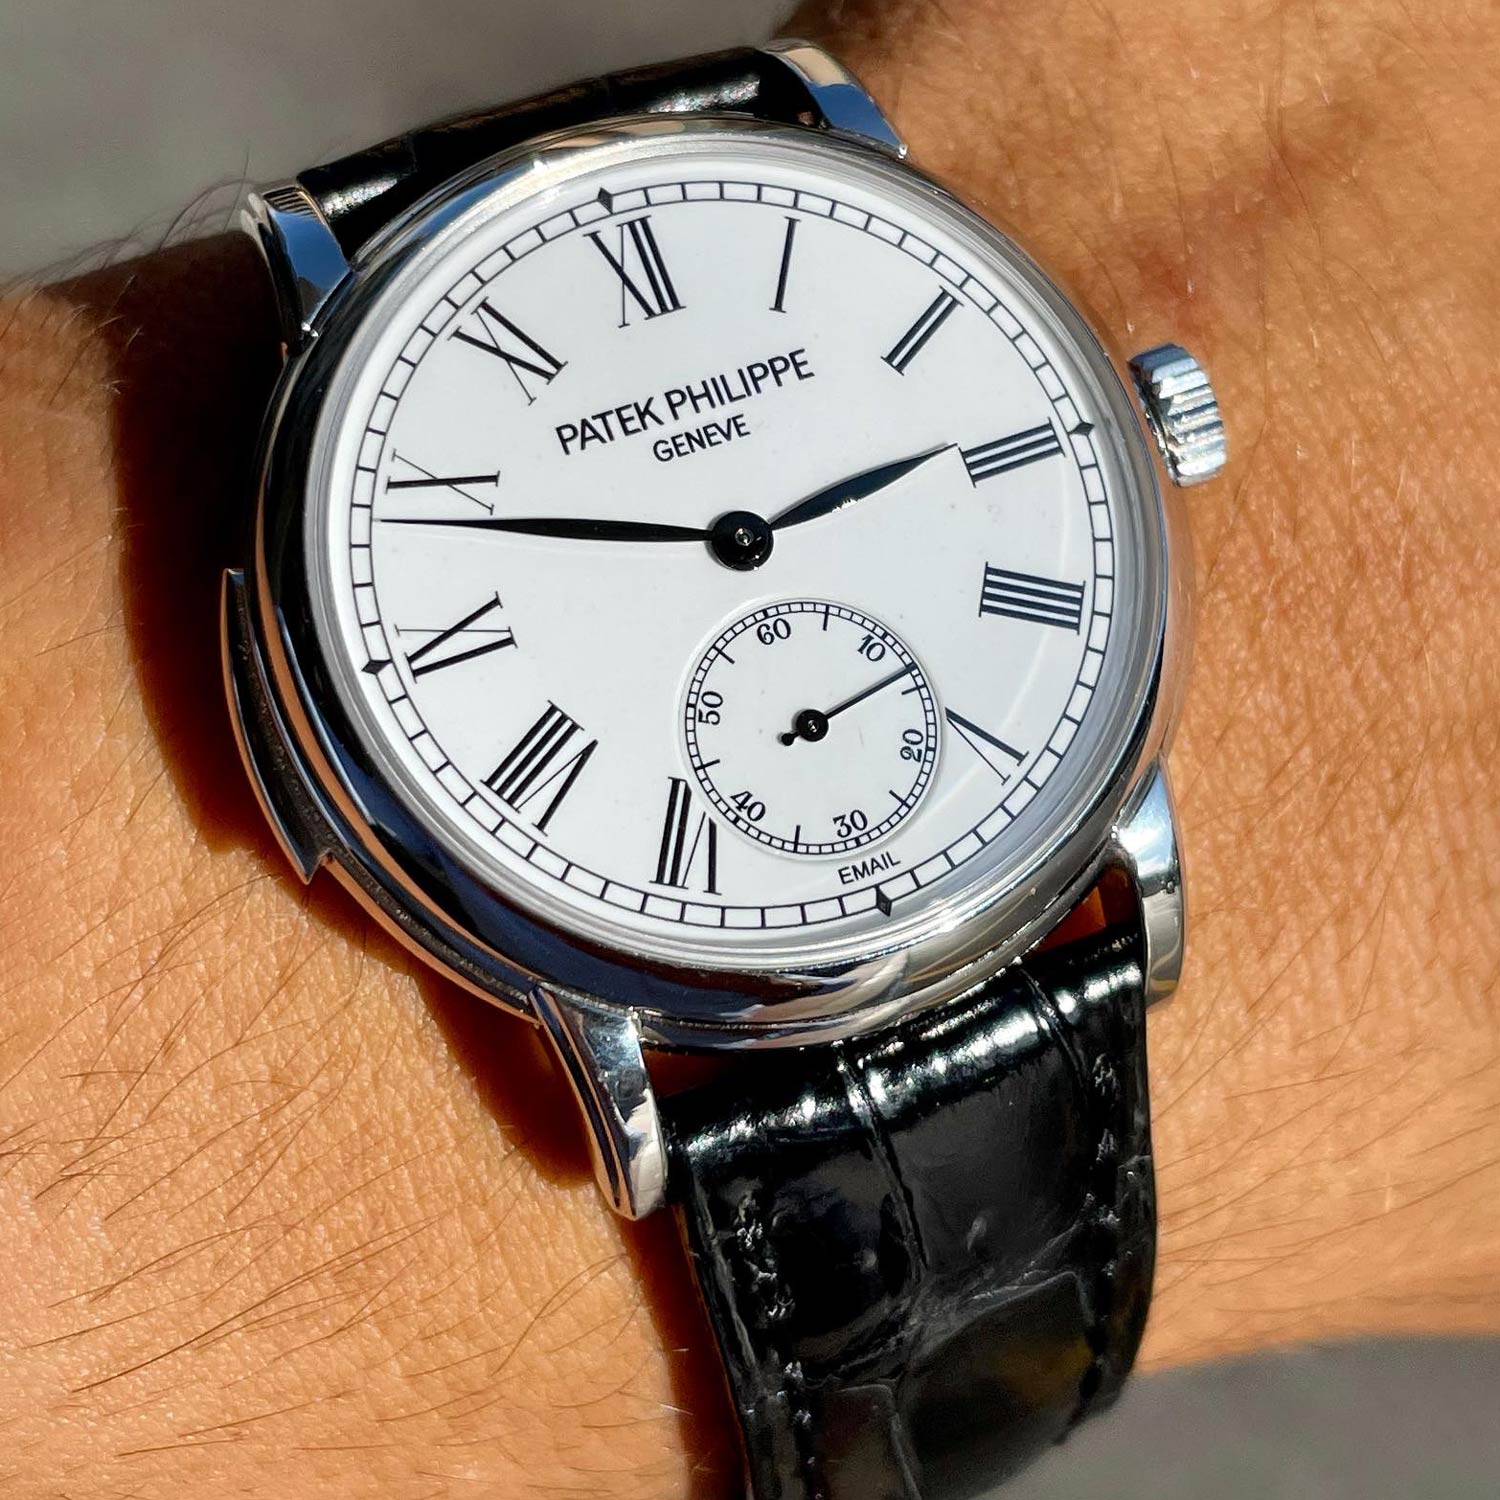 Lot 150 Patek Philippe: Gorgeous and Very Rare Minute Repeater Wristwatch in Platinum, Reference 5078p, with Enamel Dial, Box, Certificate of Origin, Engine for Time-Machine and Book